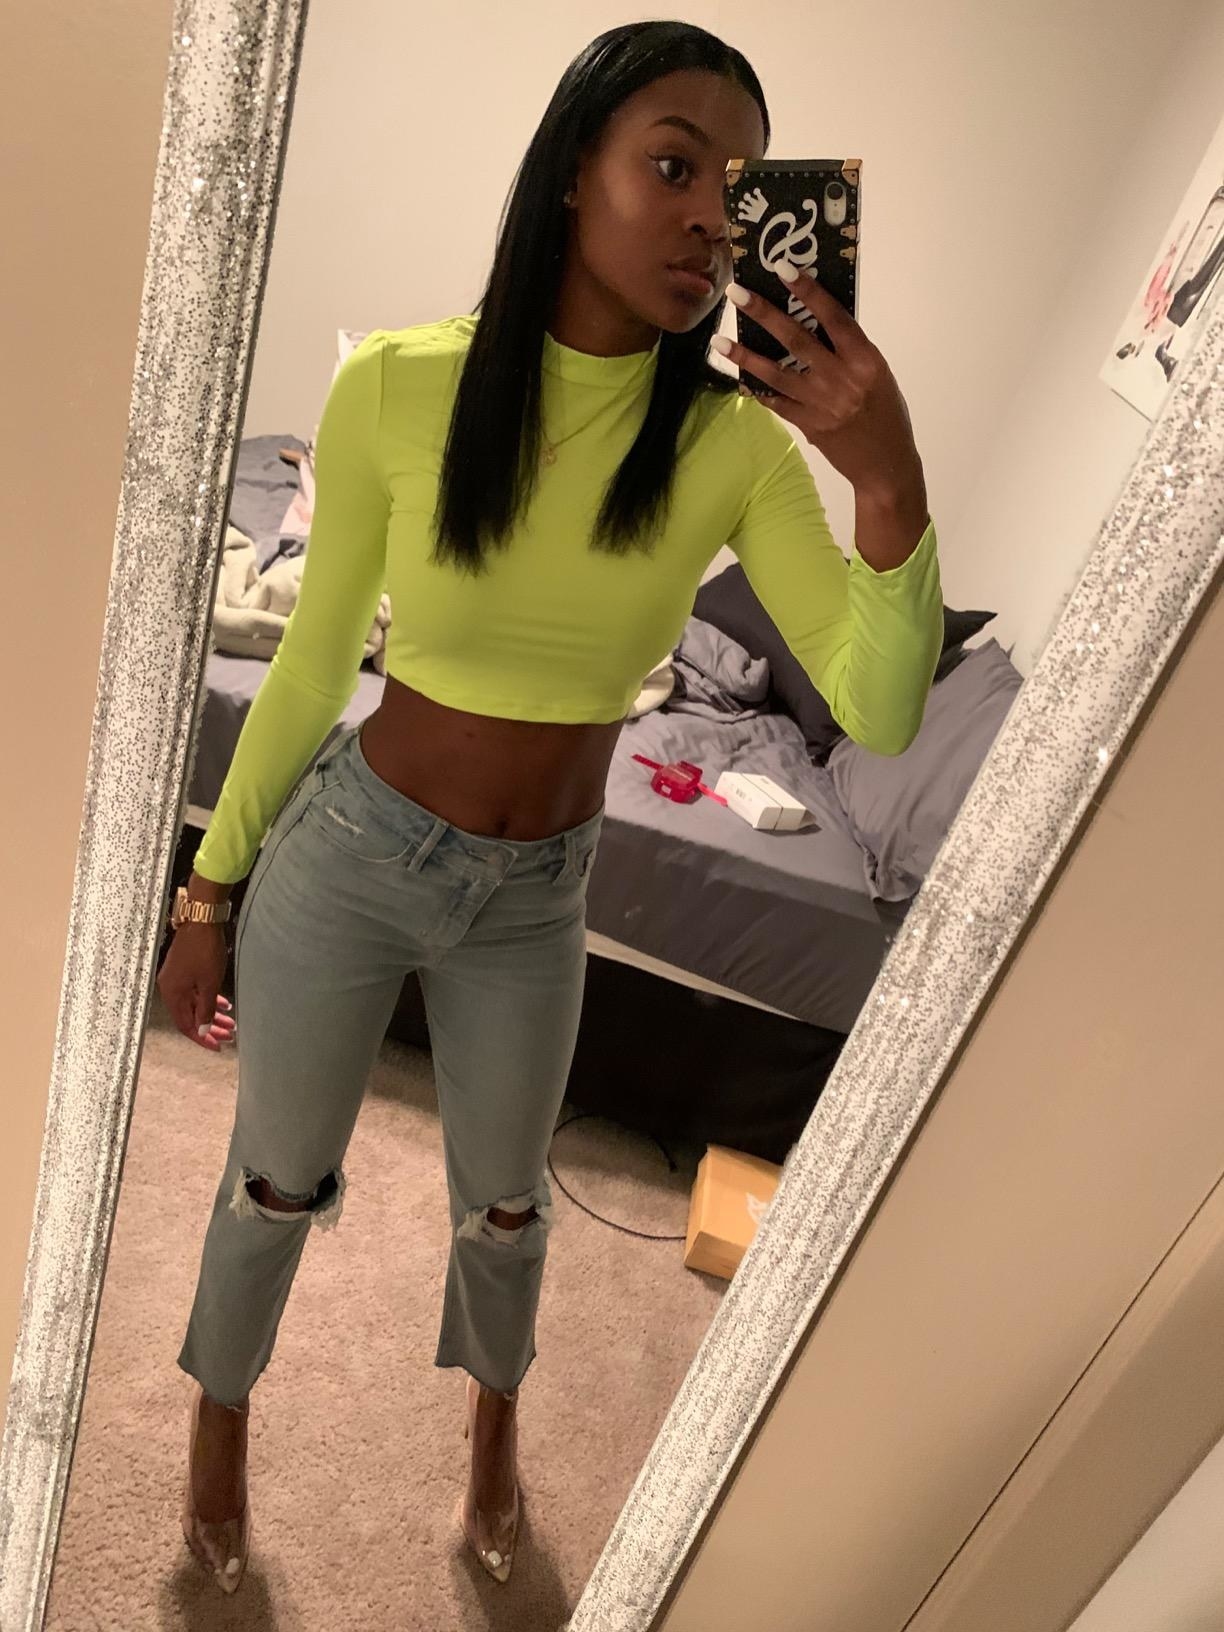 15 Best Long-Sleeve Crop Tops To Arm Yourself With 2022